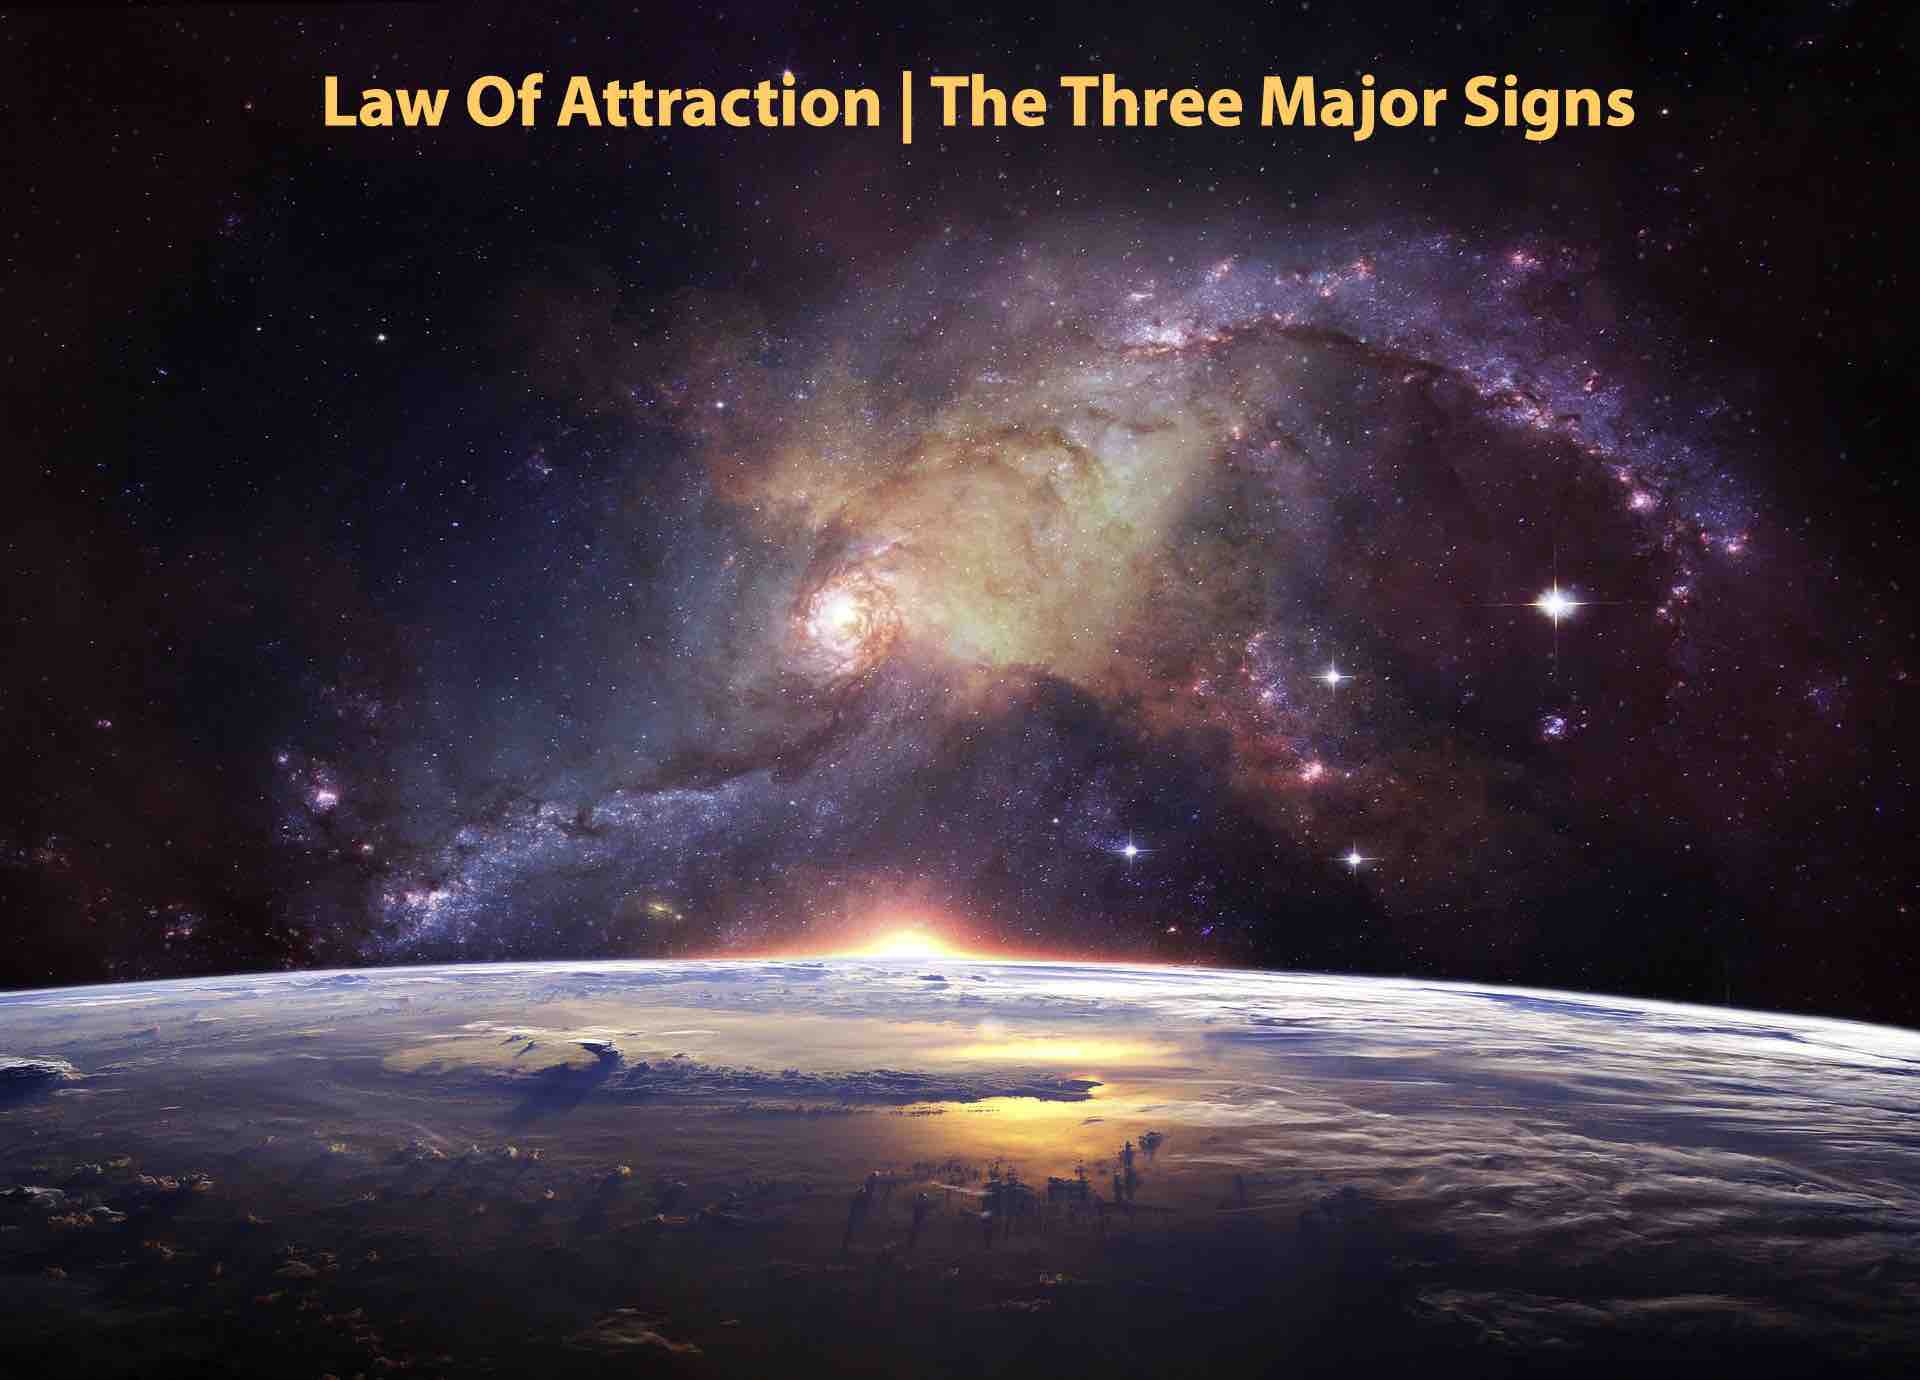 Law of Attraction | The Three Major Signs